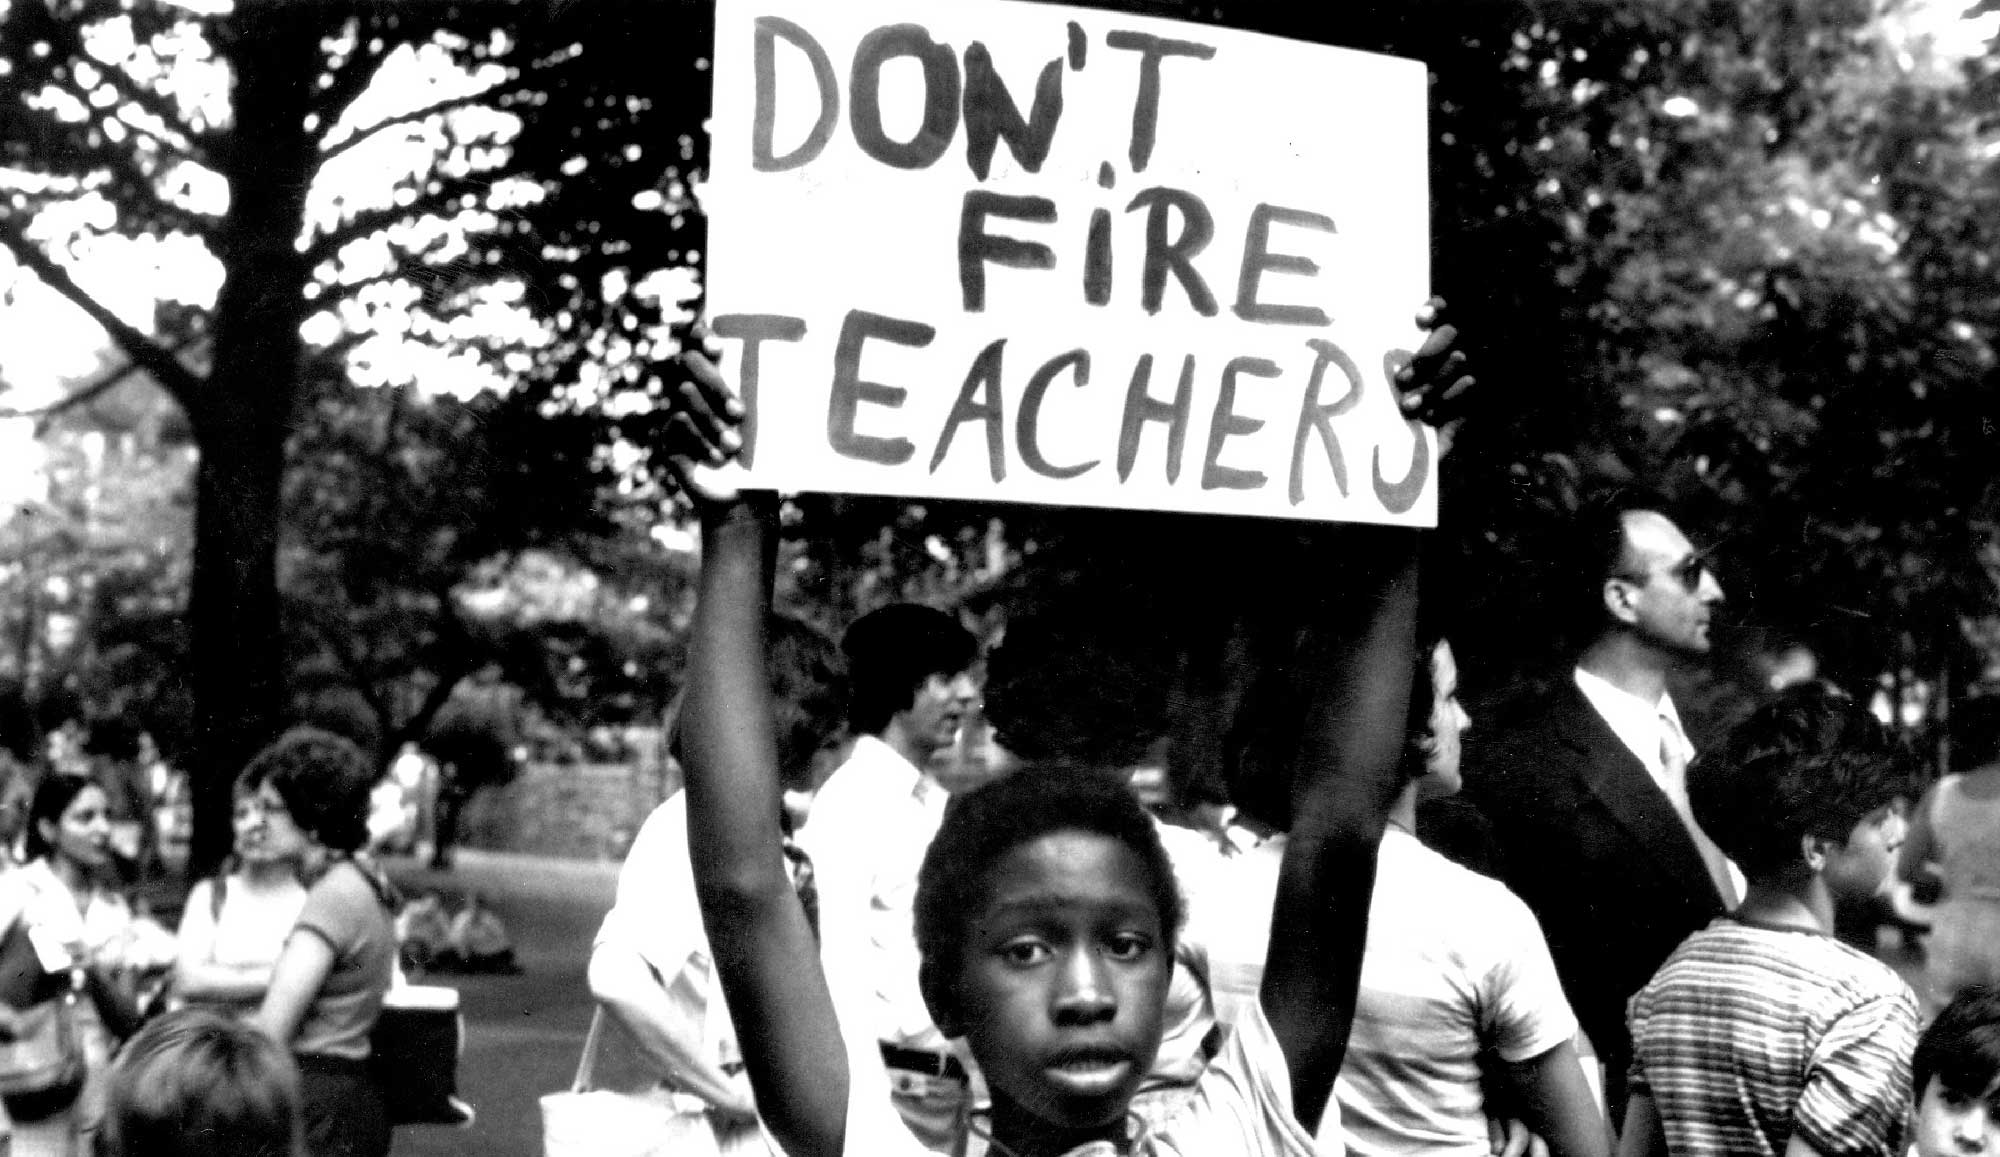 Black and white photograph close-up perspective of an African-American child holding up a sign that shows "Don't Fire Teachers" while there are other people nearby him somewhere outside